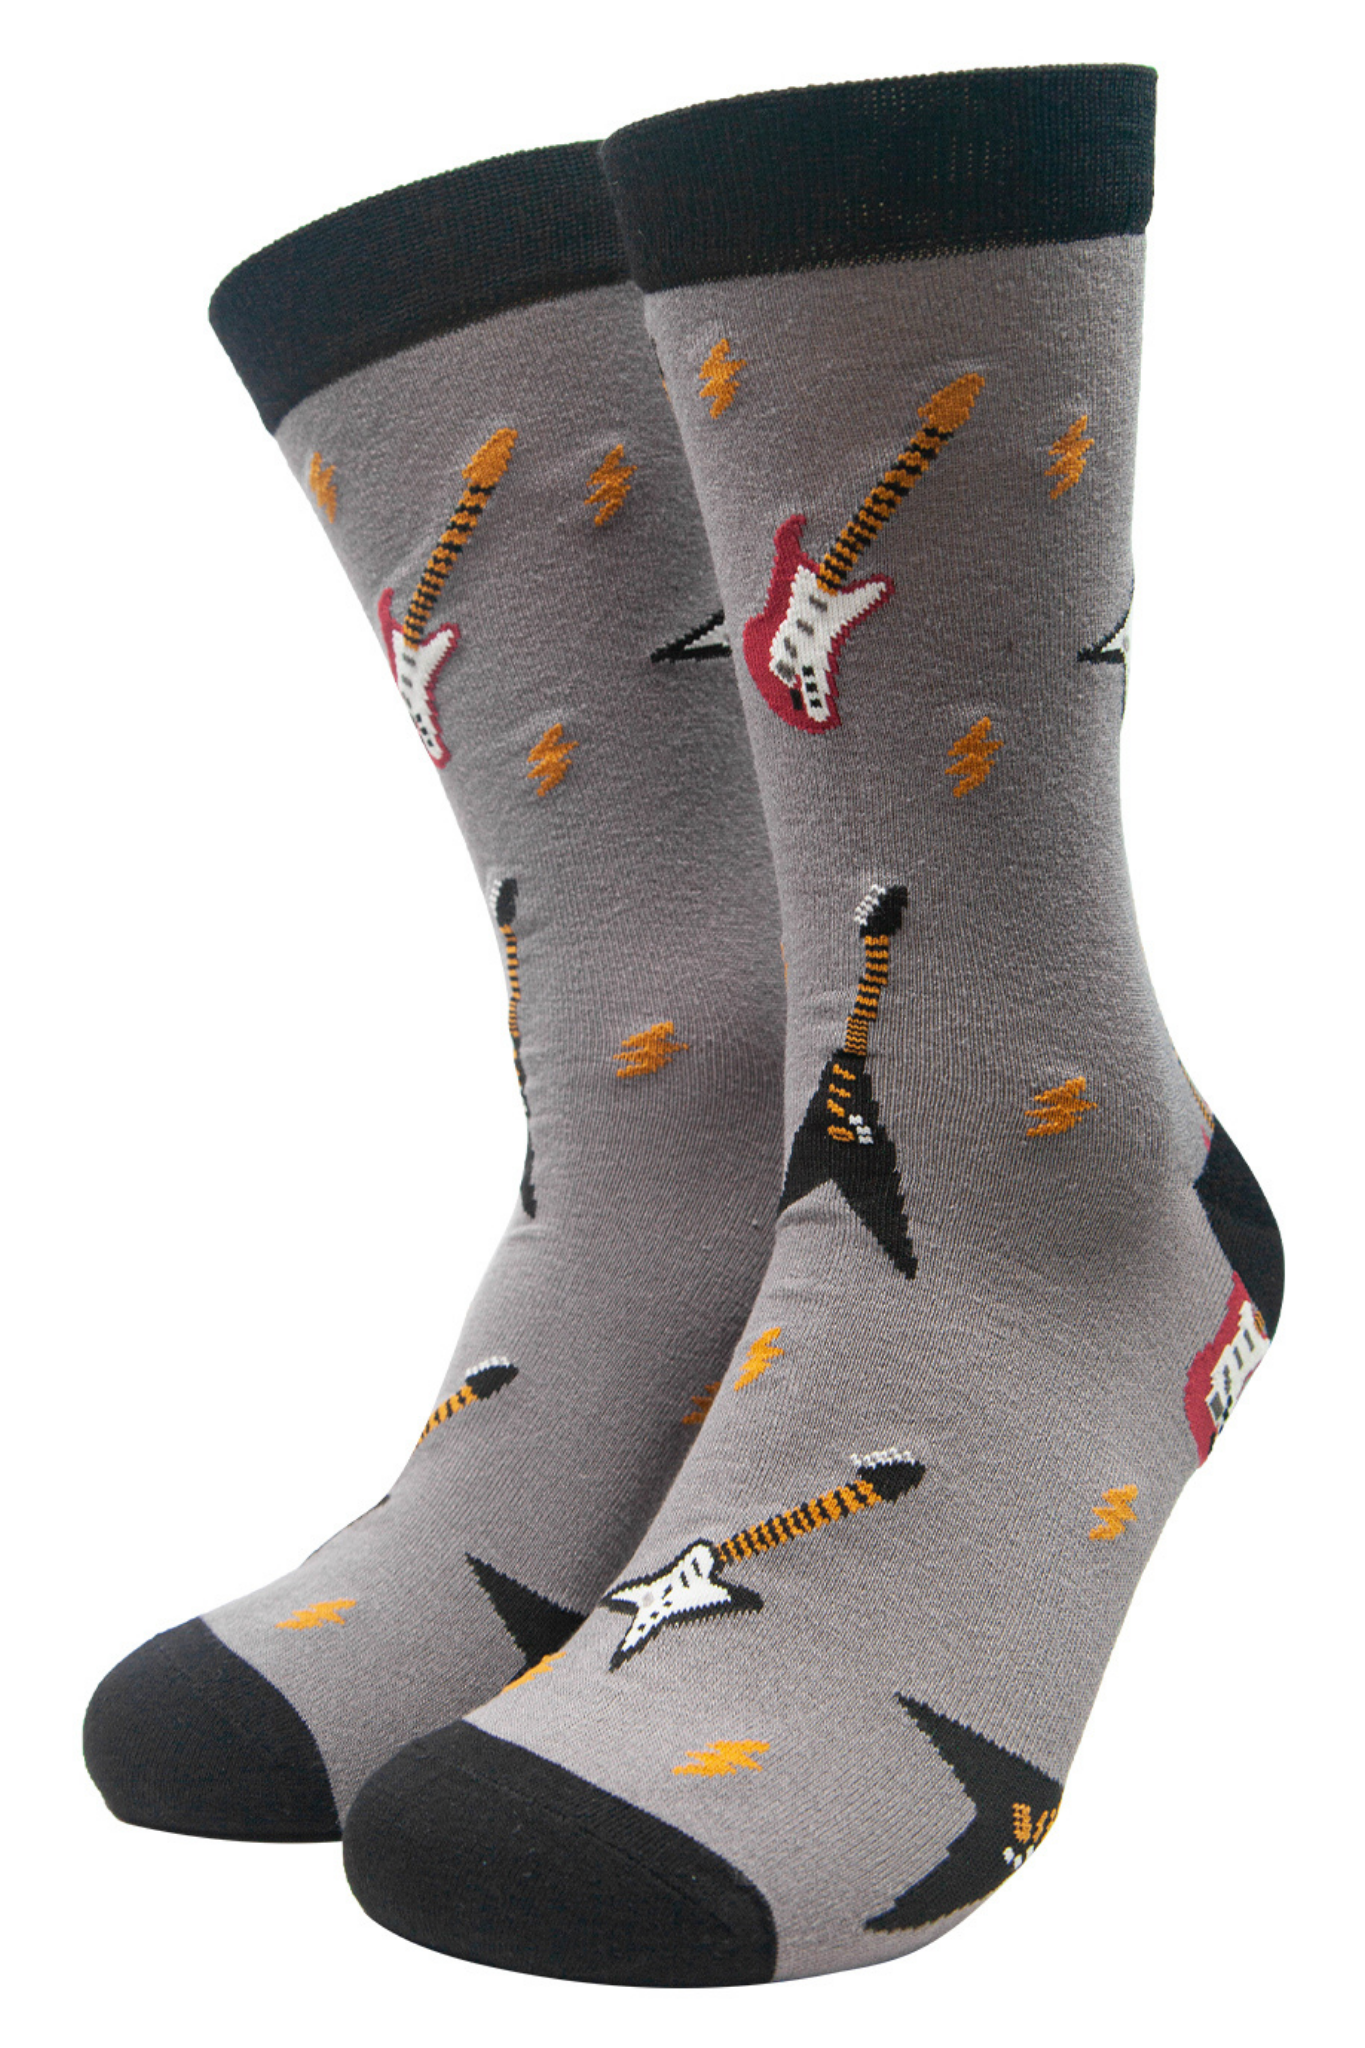 grey bamboo socks with a pattern of electric guitars on them, black heel , toe and trim